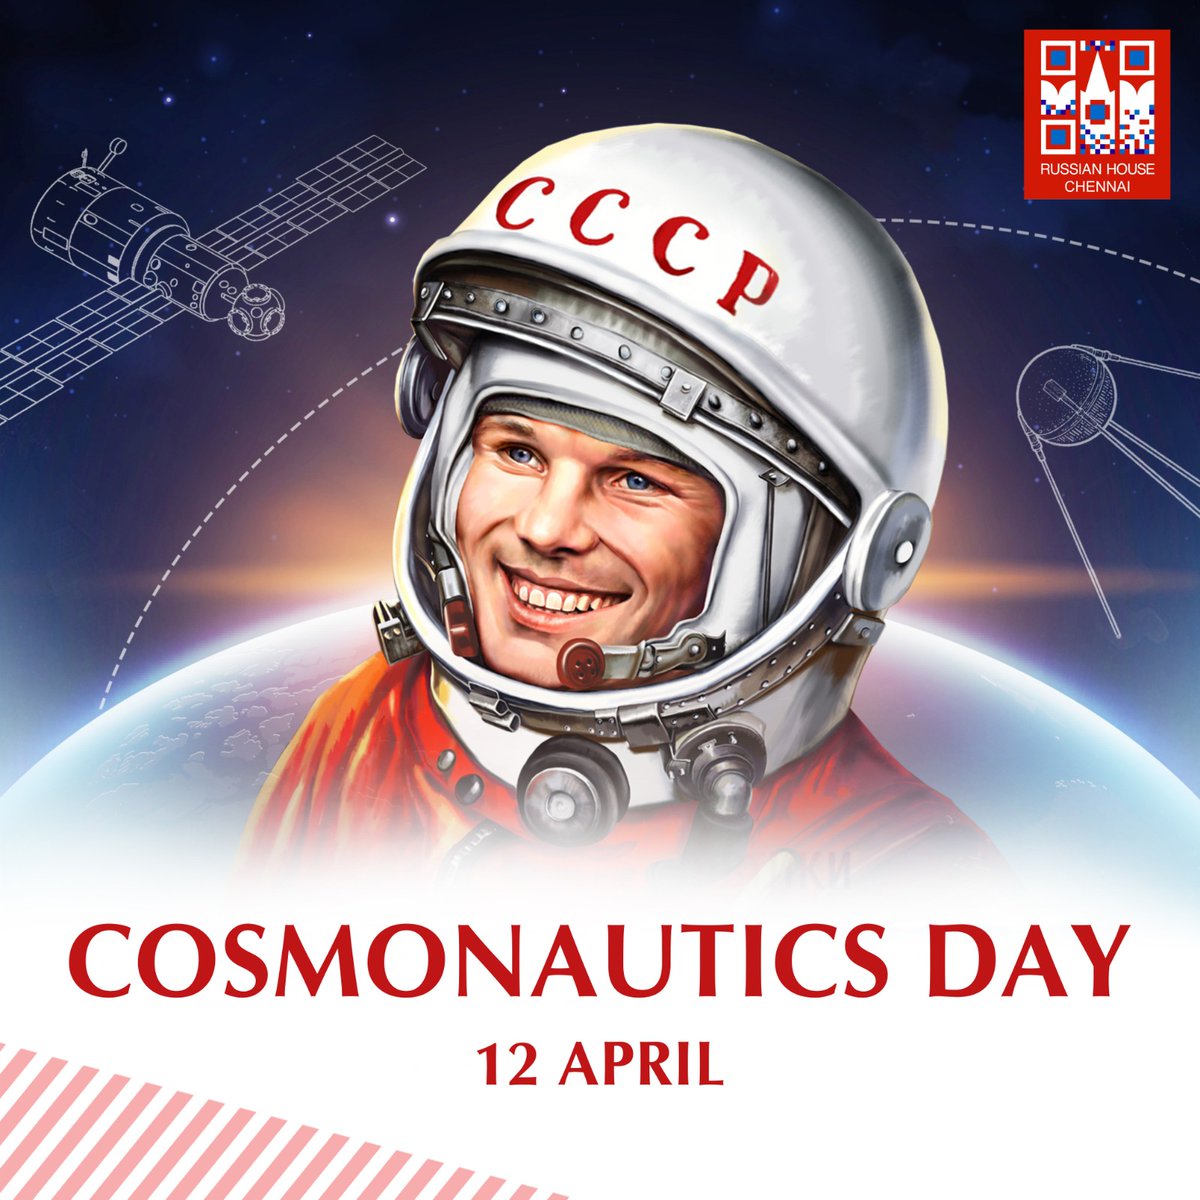 🚀 Today Russia celebrates Cosmonautics Day! This holiday commemorates the first manned flight to Space by Soviet pilot and cosmonaut Yuri #Gagarin on April 12, 1961. It symbolizes not only technical achievements of mankind but also our most daring dreams and aspirations. #OTD